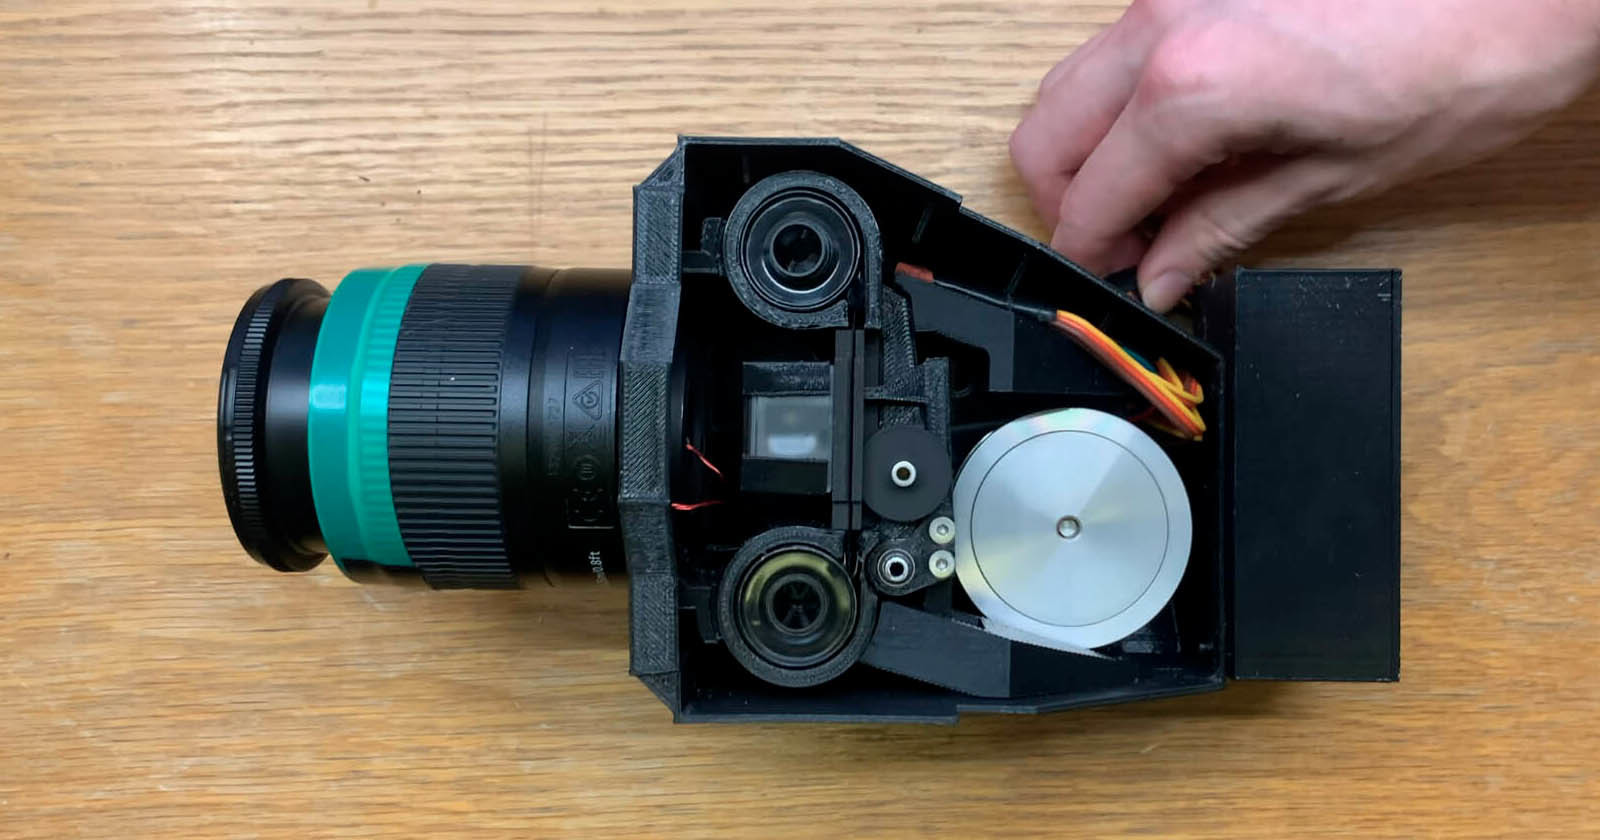  college student makes 3d-printed movie camera takes 